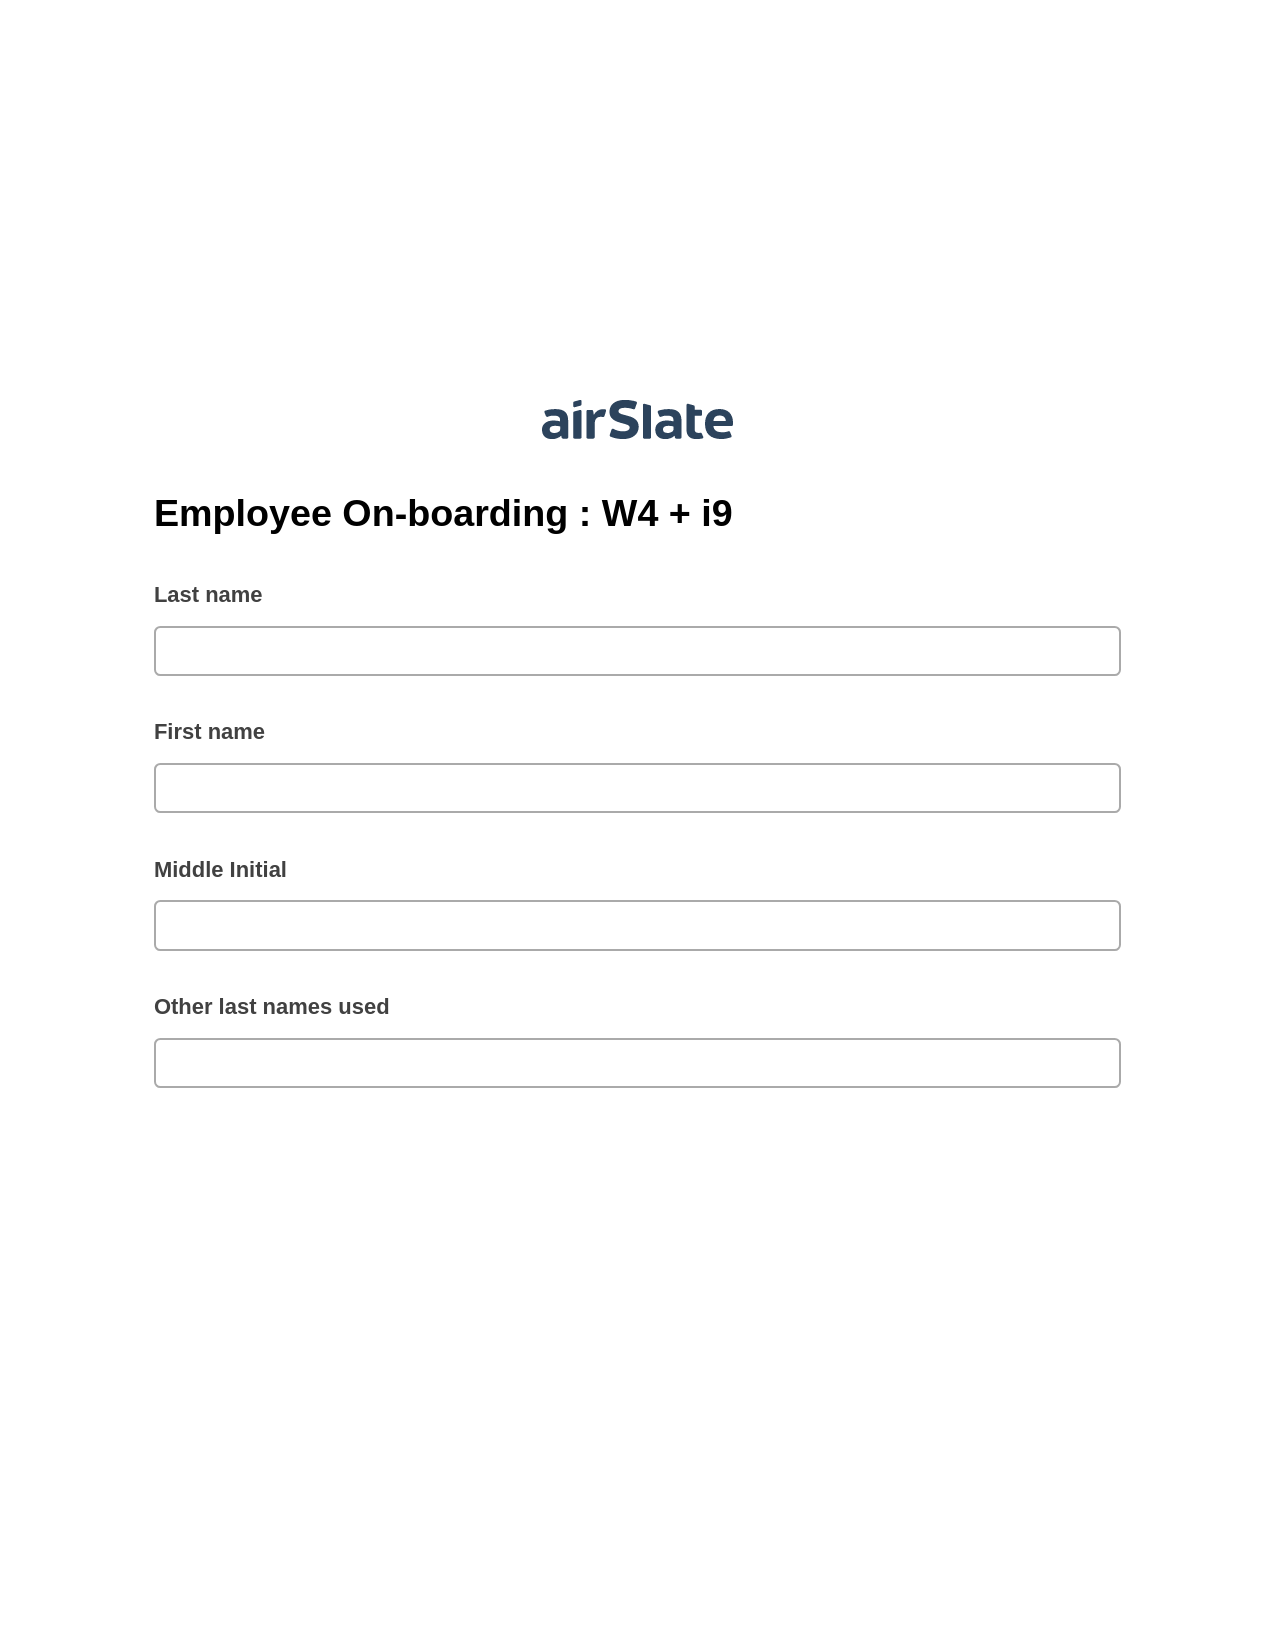 Multirole Employee On-boarding : W4 + i9 Pre-fill Slate from MS Dynamics 365 Records Bot, Update MS Dynamics 365 Records Bot, Export to Smartsheet Bot